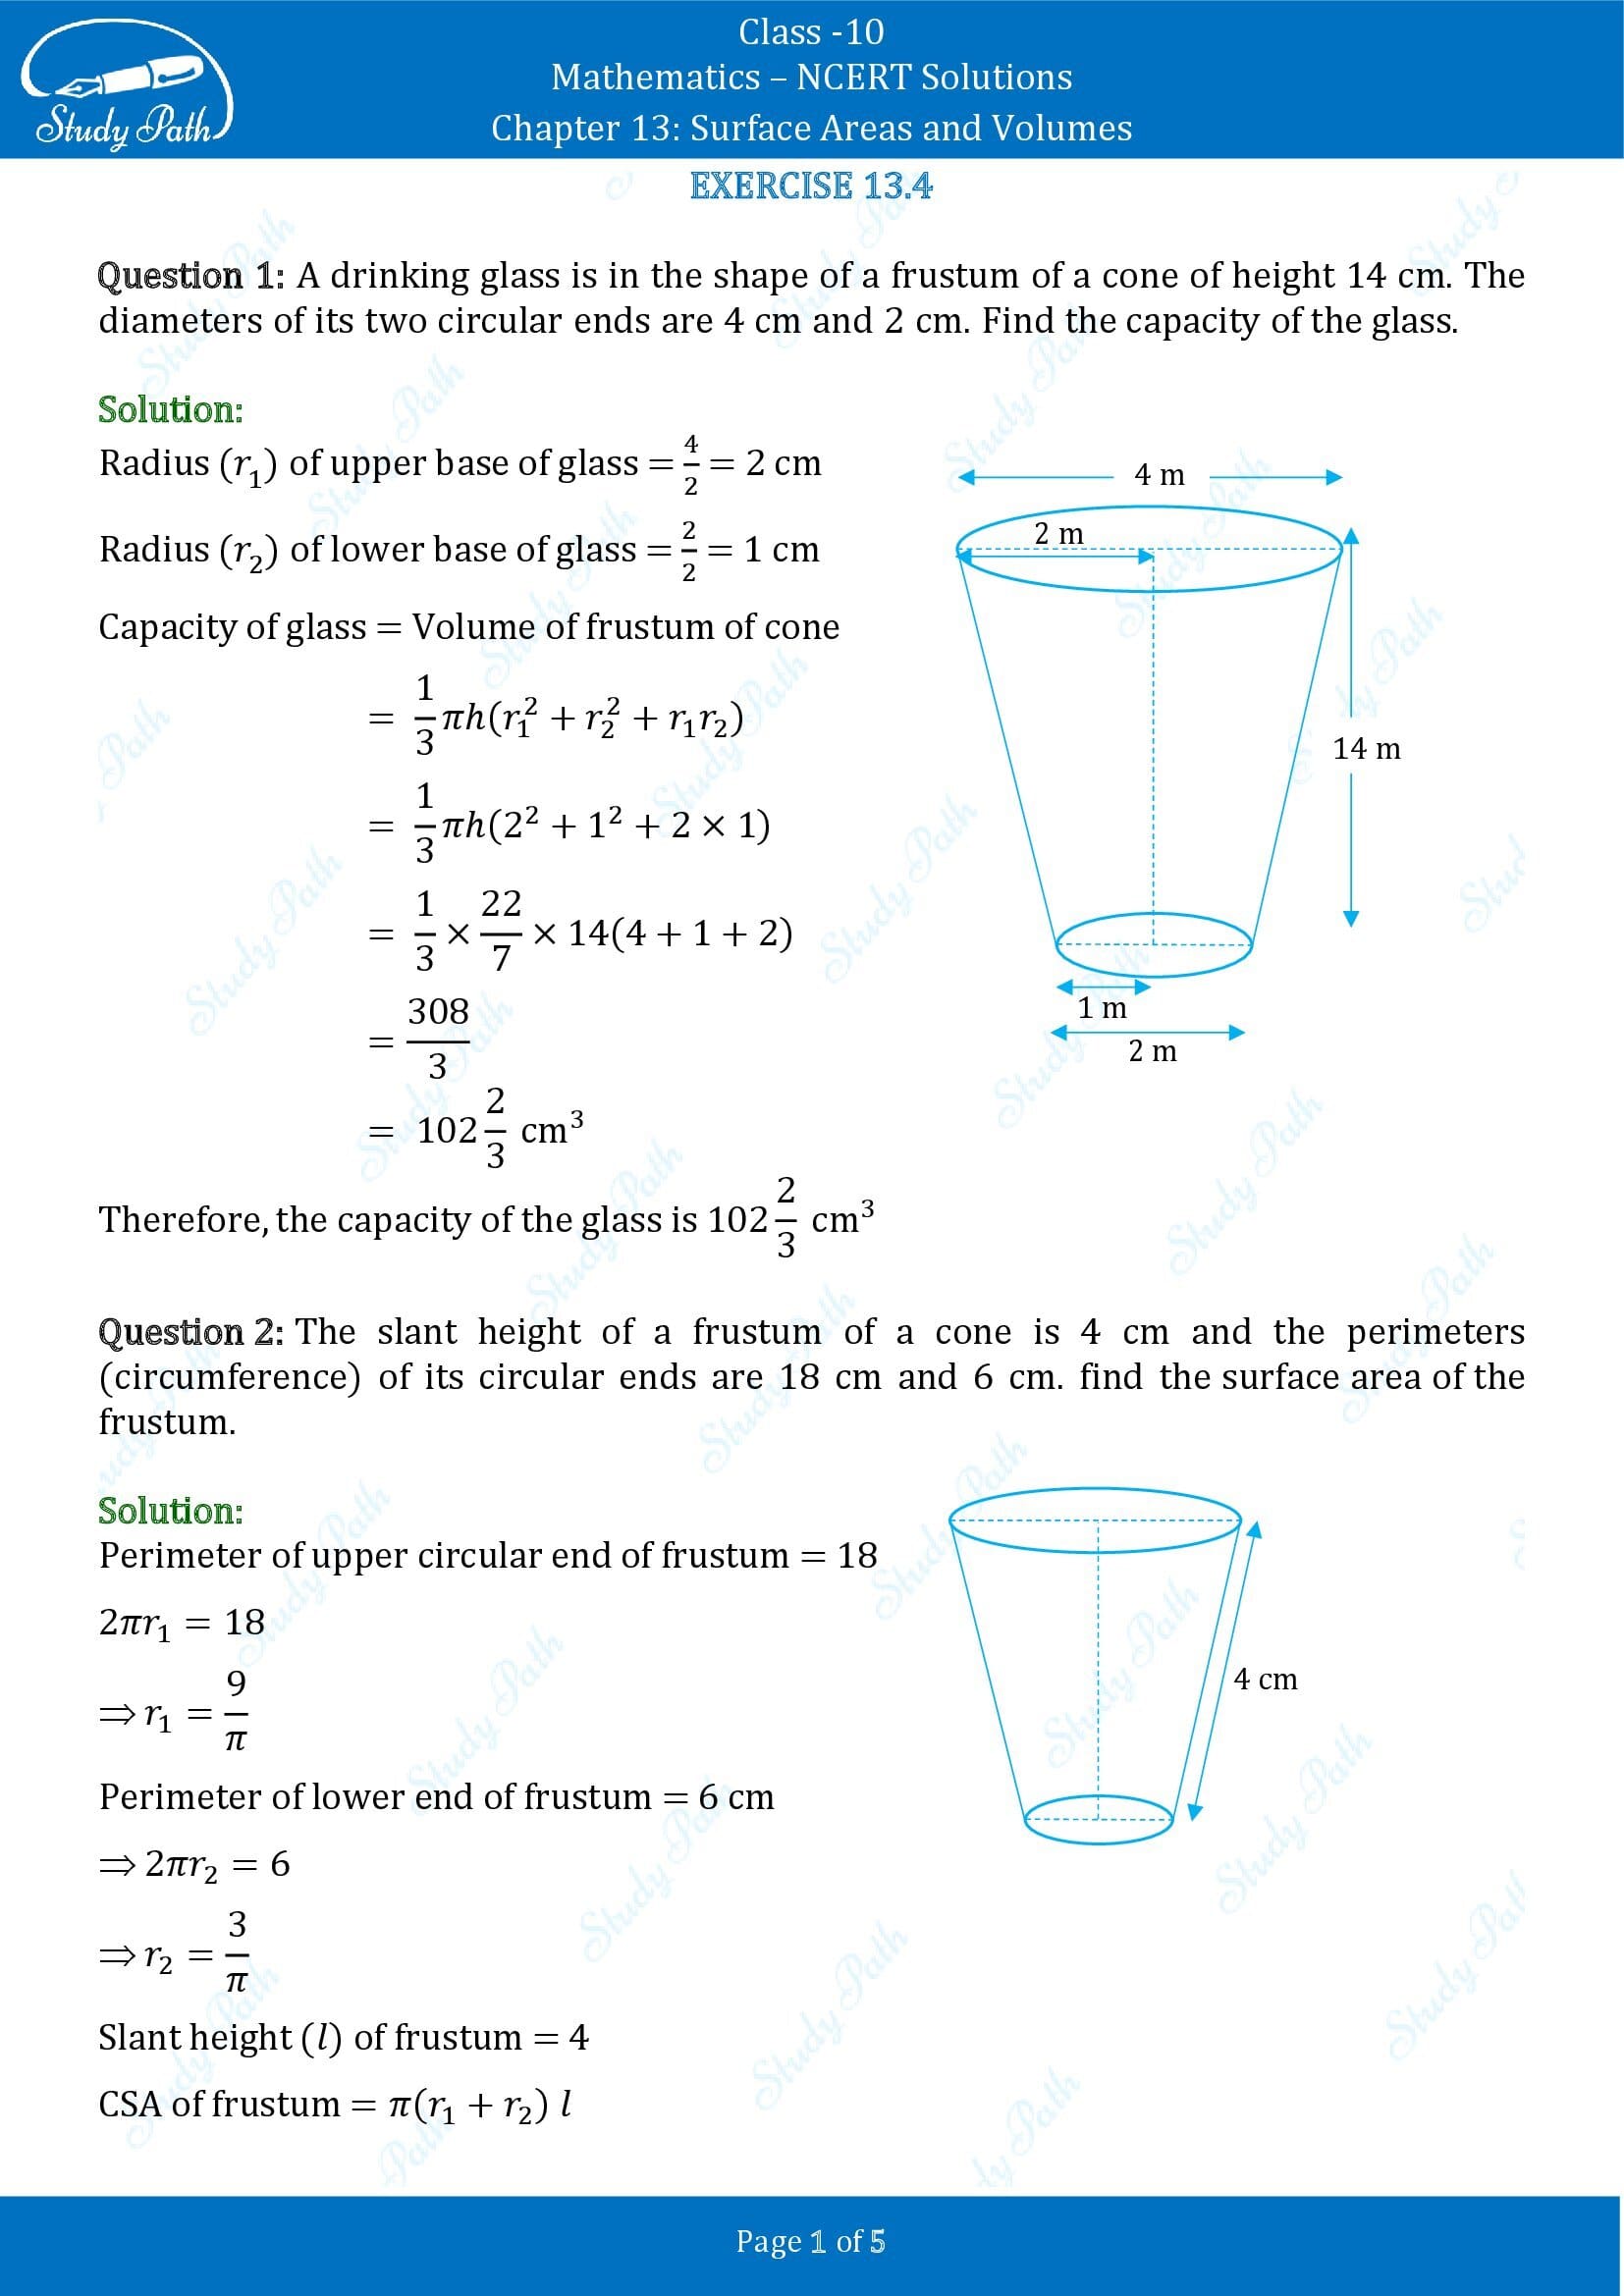 NCERT Solutions for Class 10 Maths Chapter 13 Surface Areas and Volumes Exercise 13.4 00001